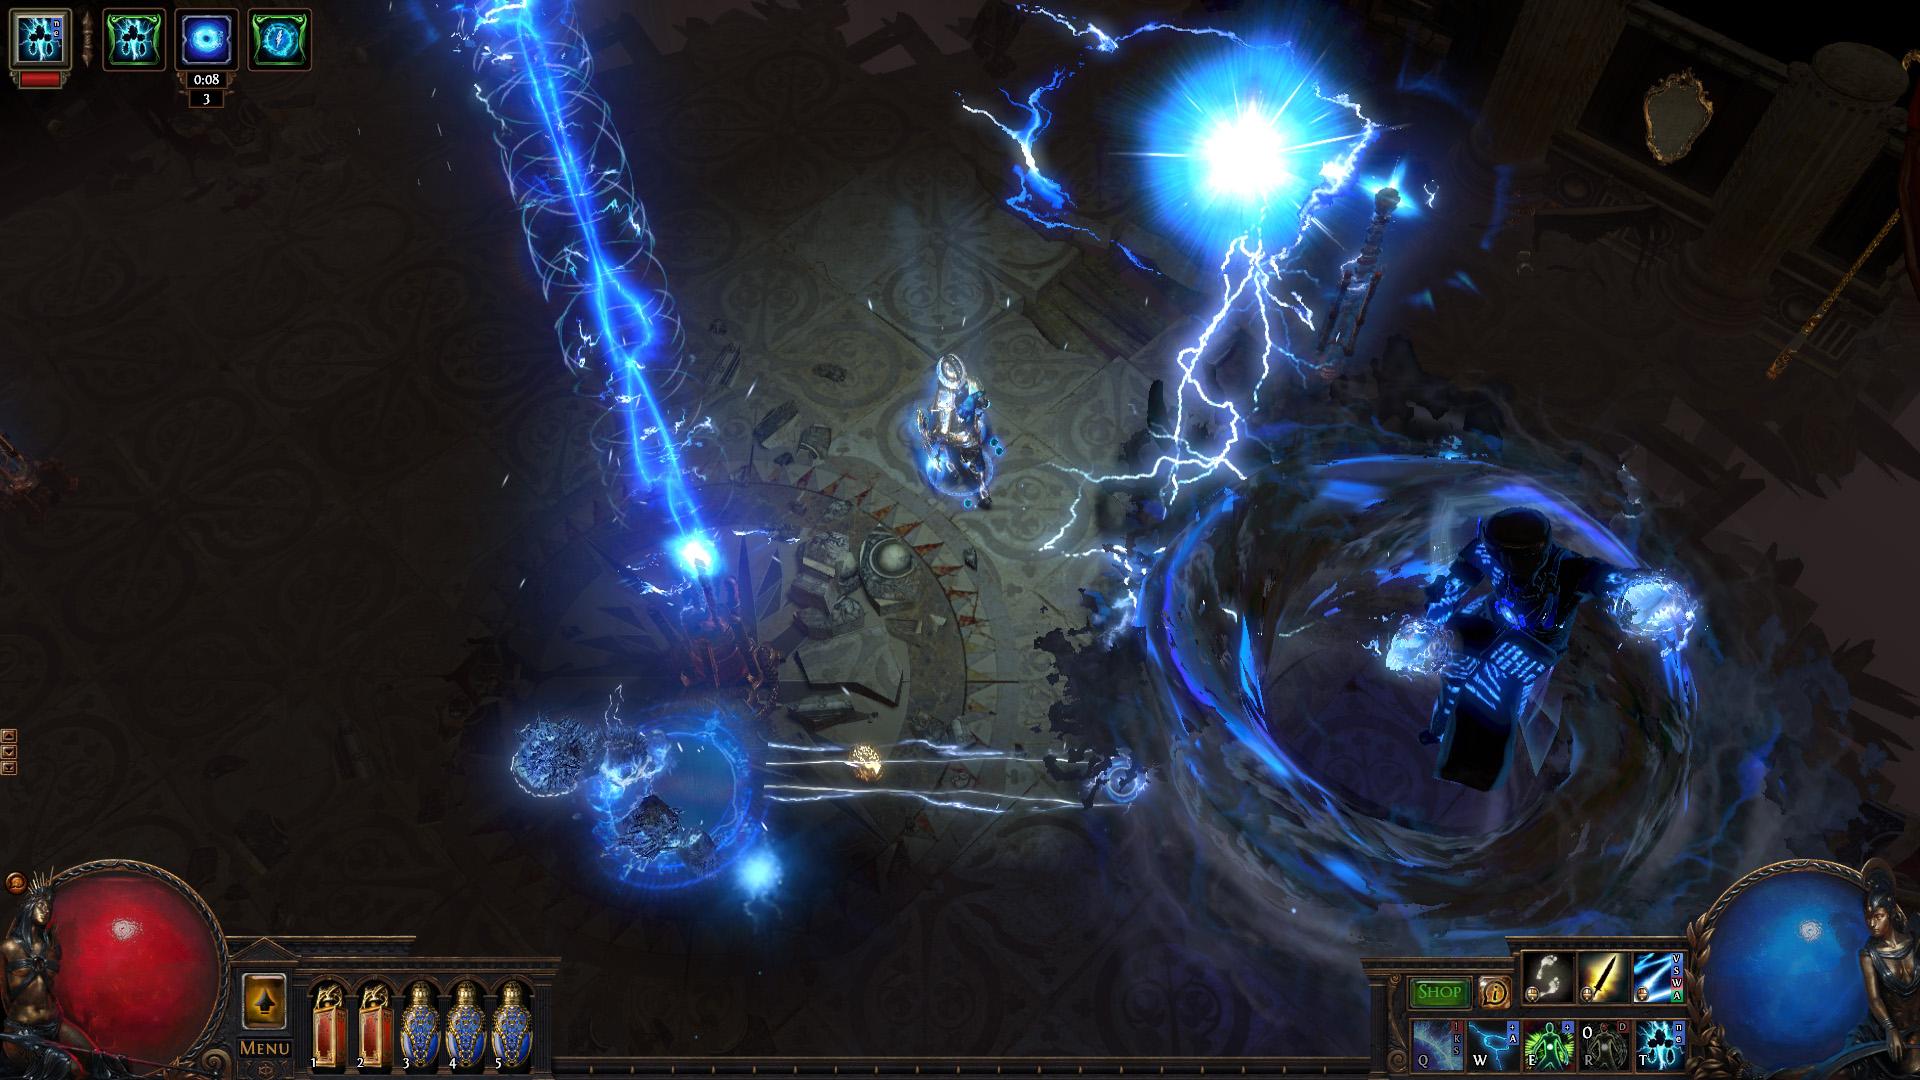 Screenshot №51 from game Path of Exile